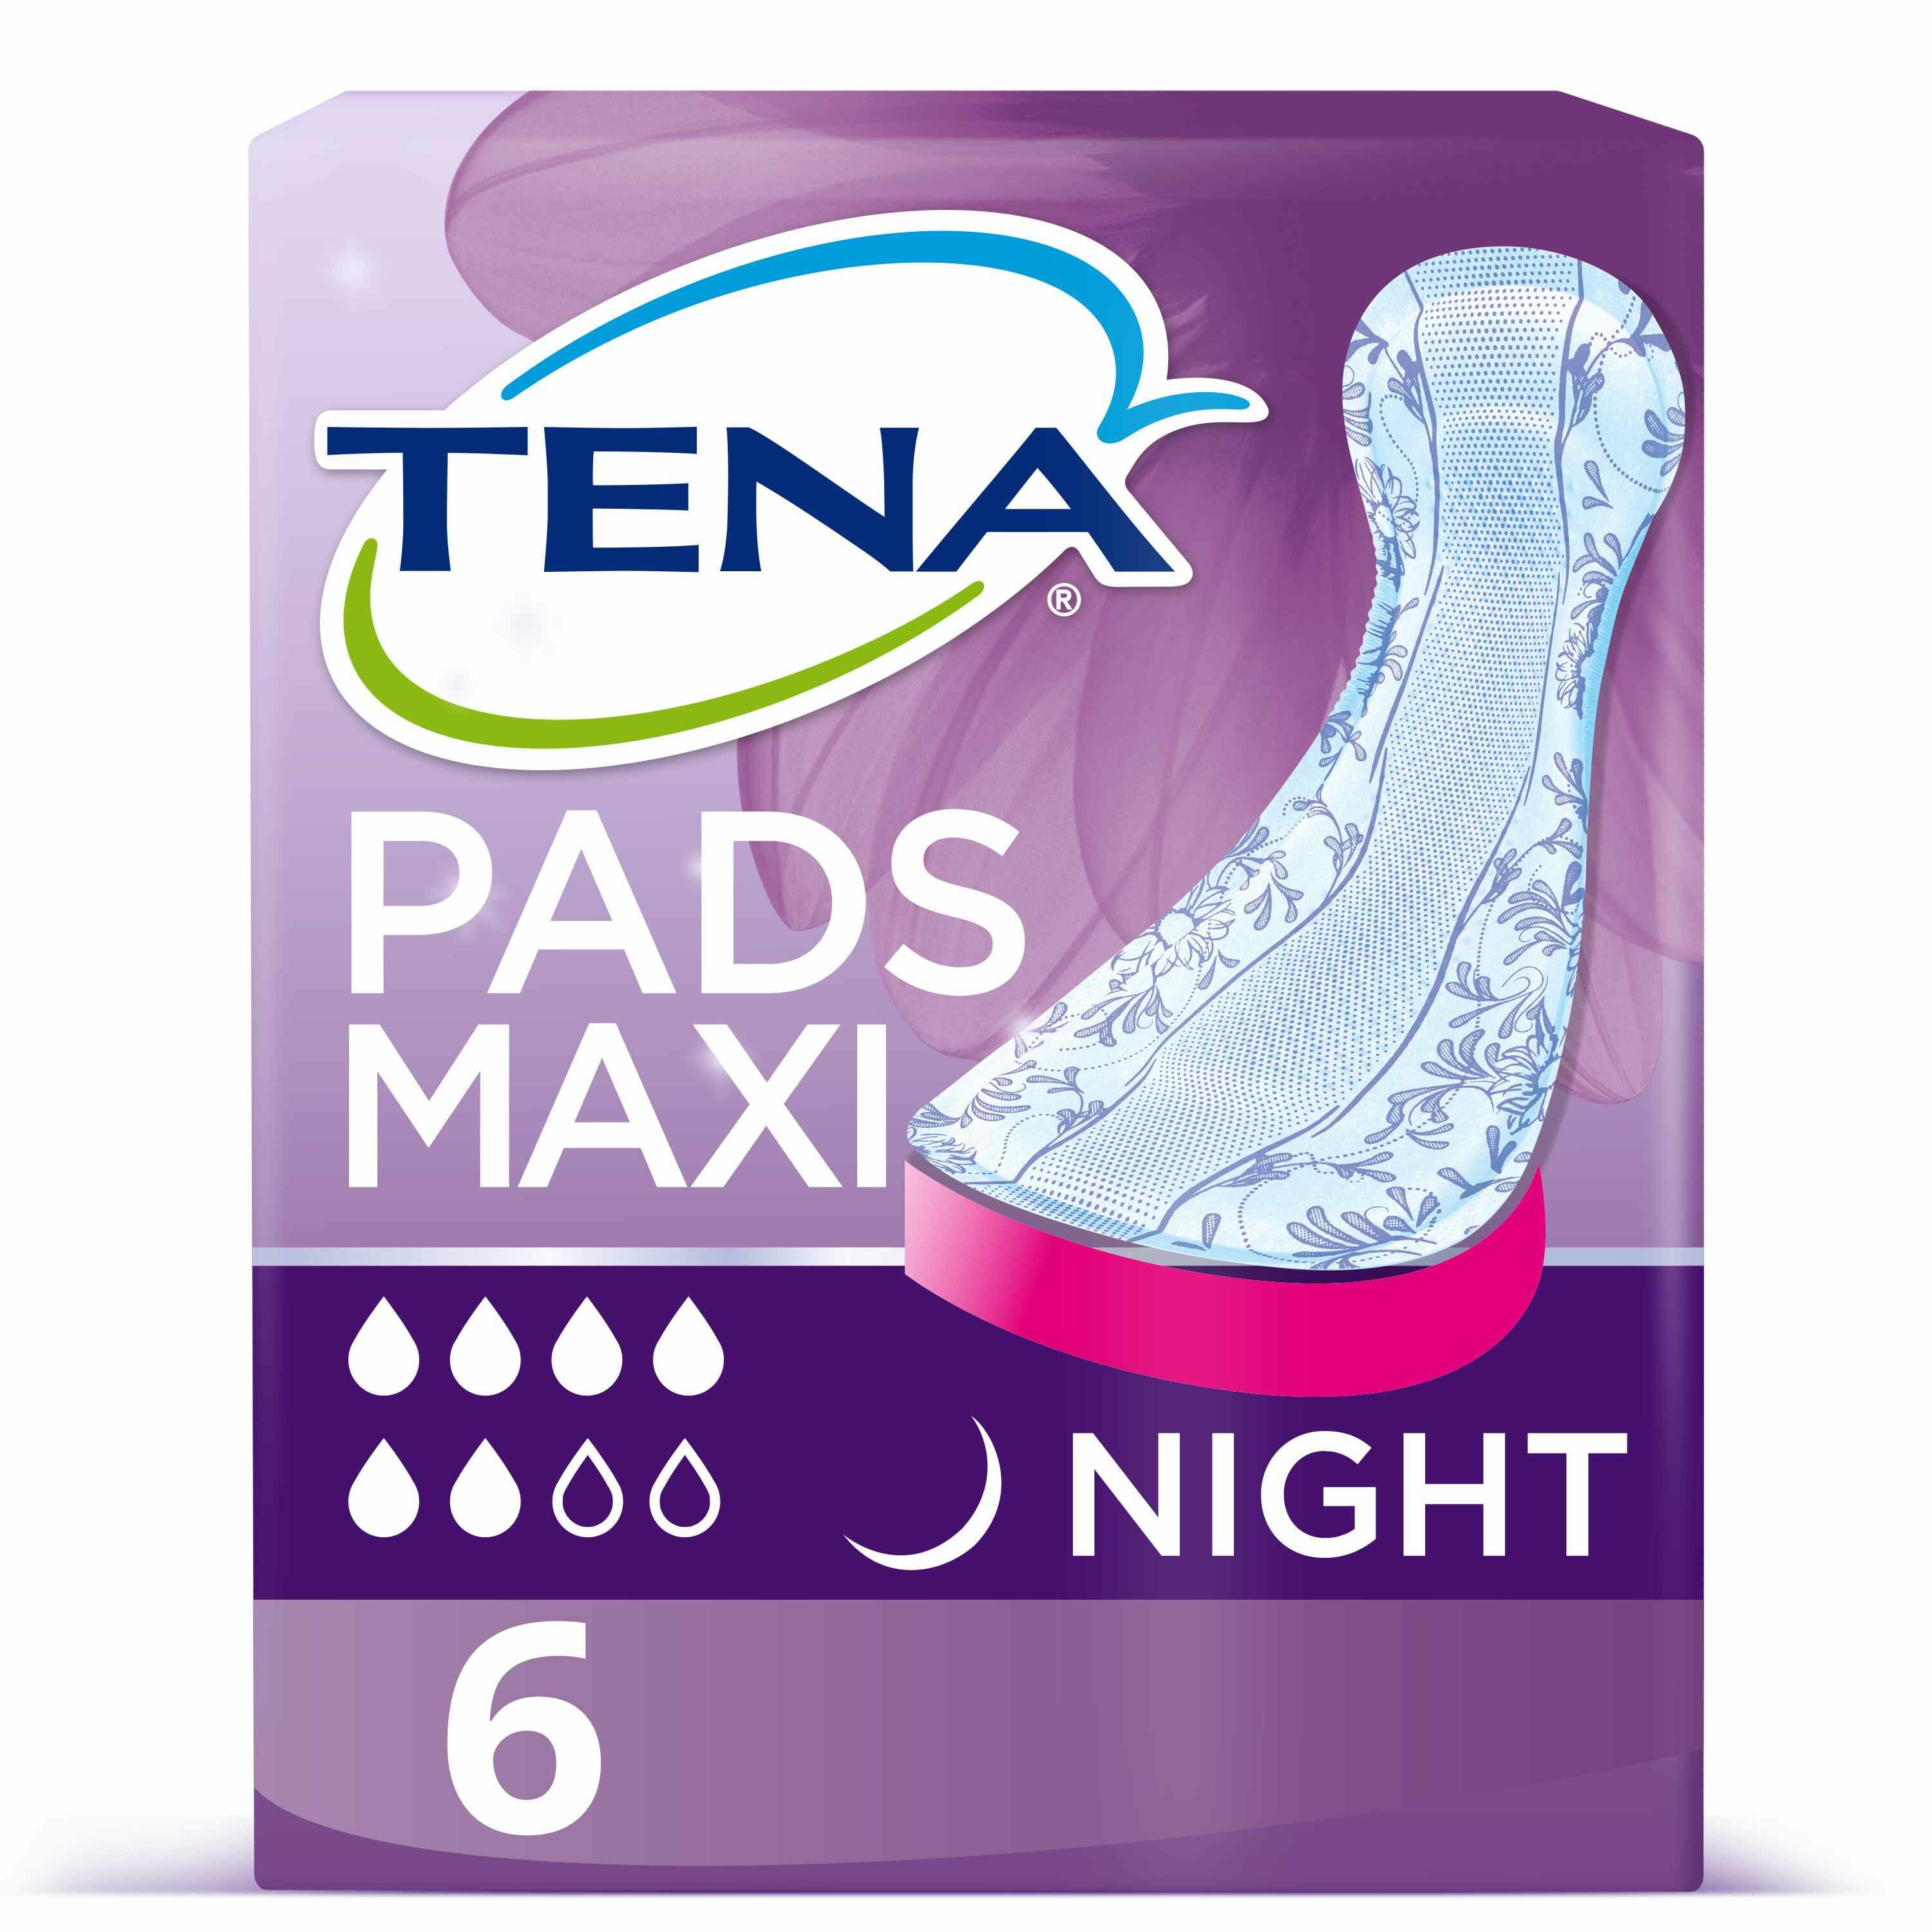 Our Guide To The Cheapest Tena Pads 